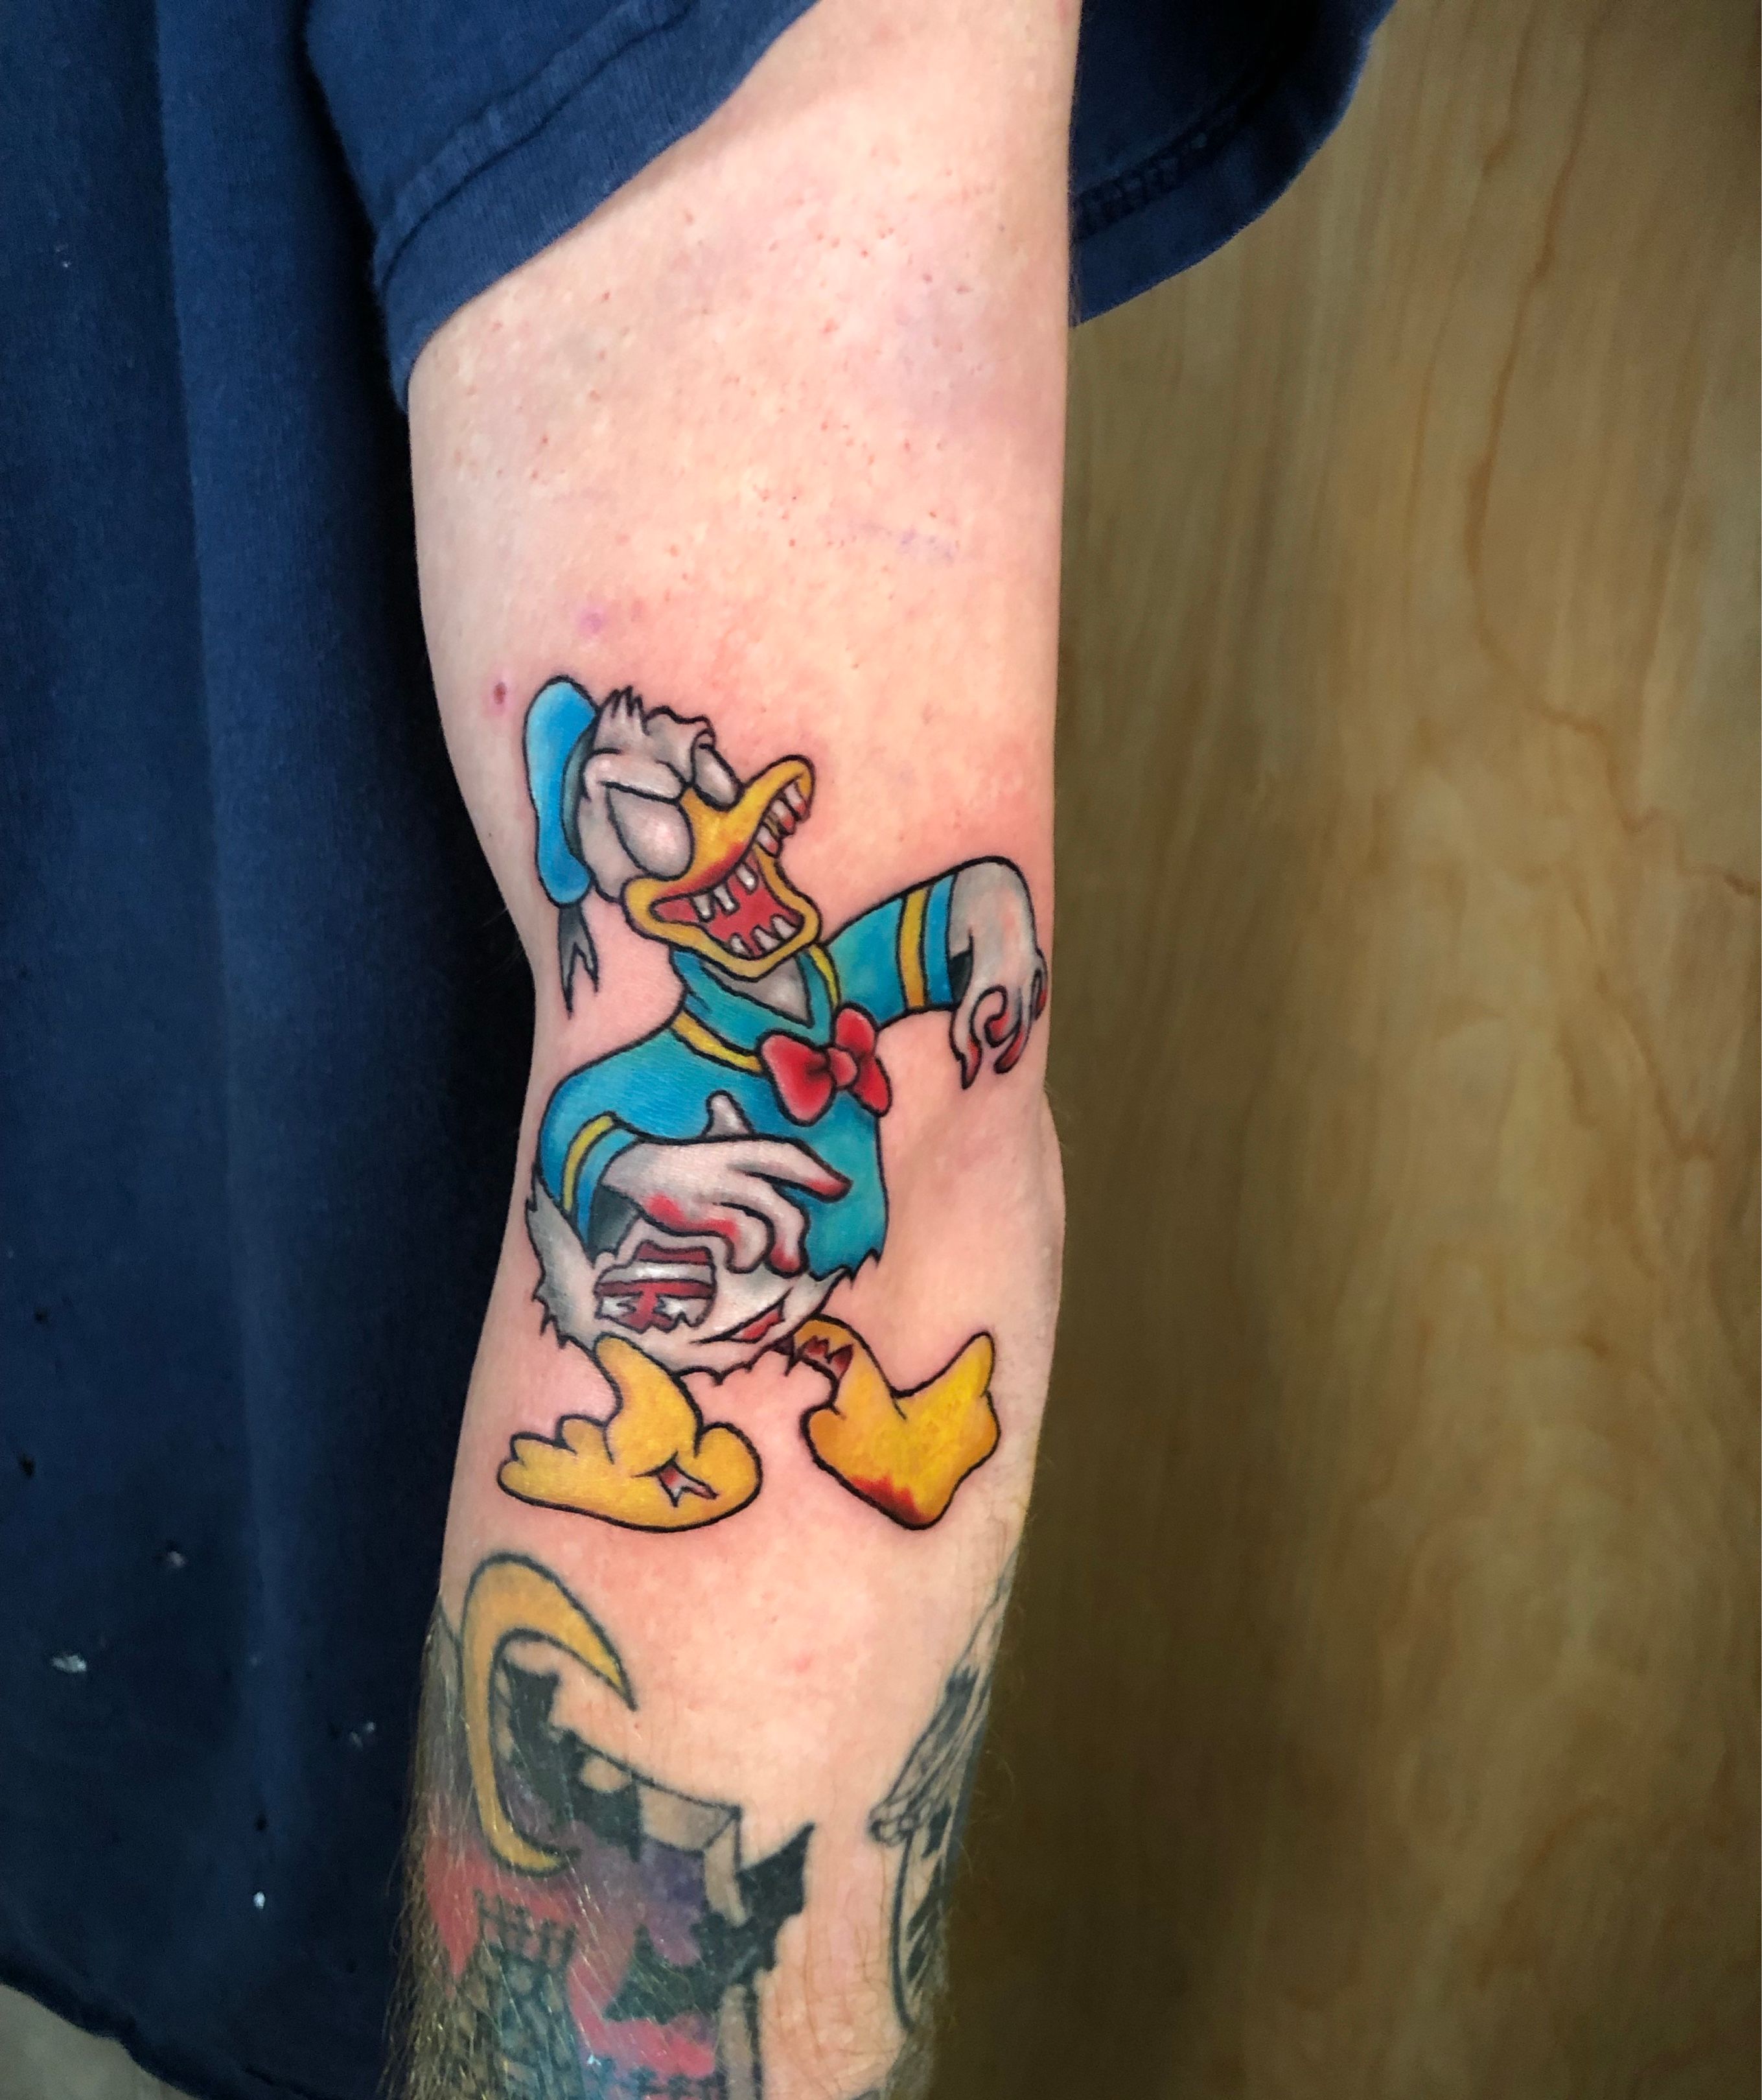 Chicano style tattoo donald duck  POWER INK TATTOO STUDIO We welcome  your Price Comfortable store tattoo are rated on Taksin Road Soi141st  branch  By Powerink tattoo studio  Facebook